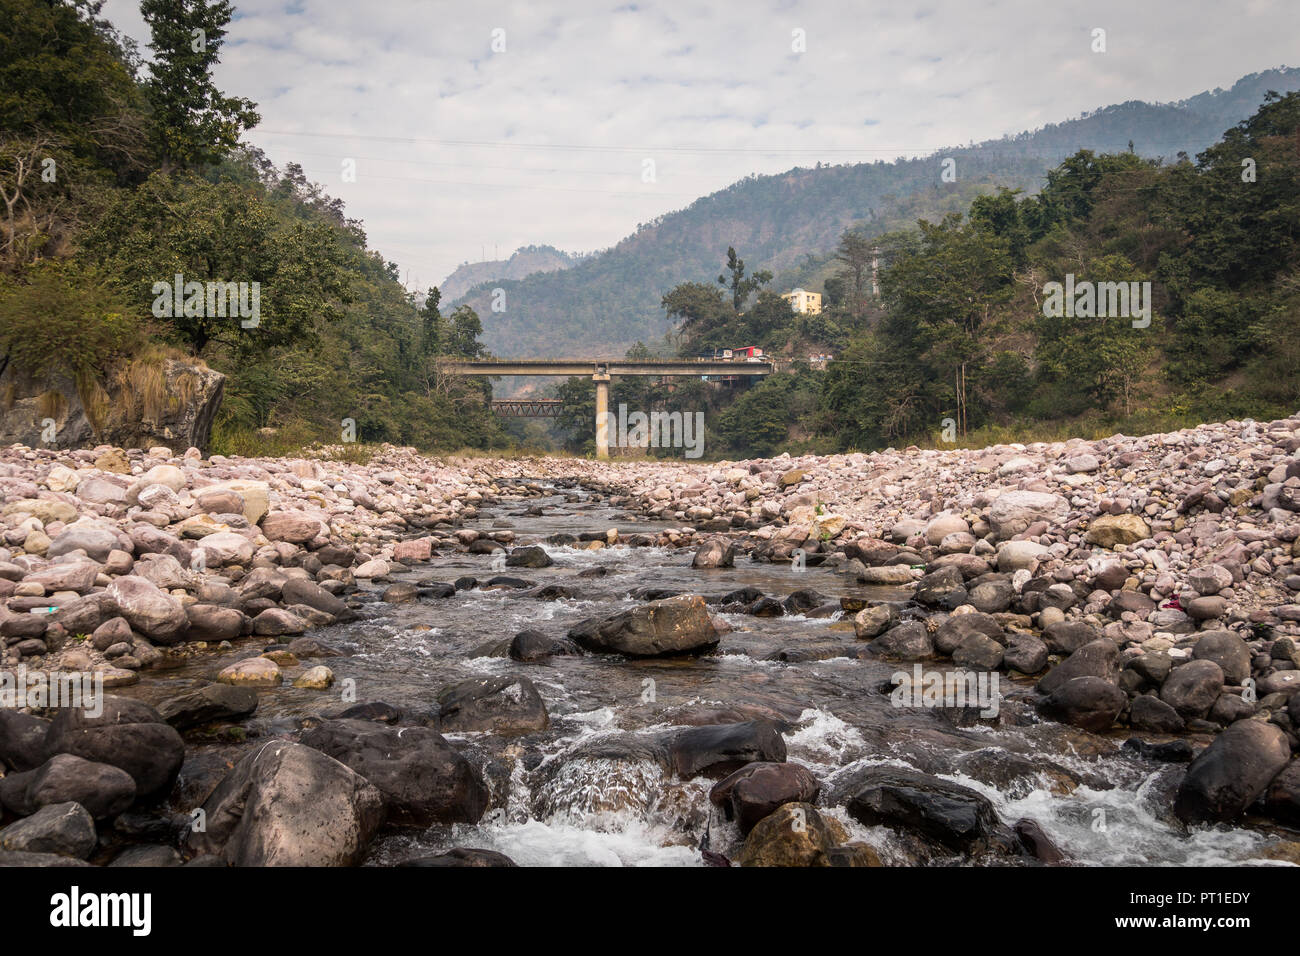 A beautiful landscape in the mountains with a bridge over the Ganges River near the city of Rishikesh India Stock Photo